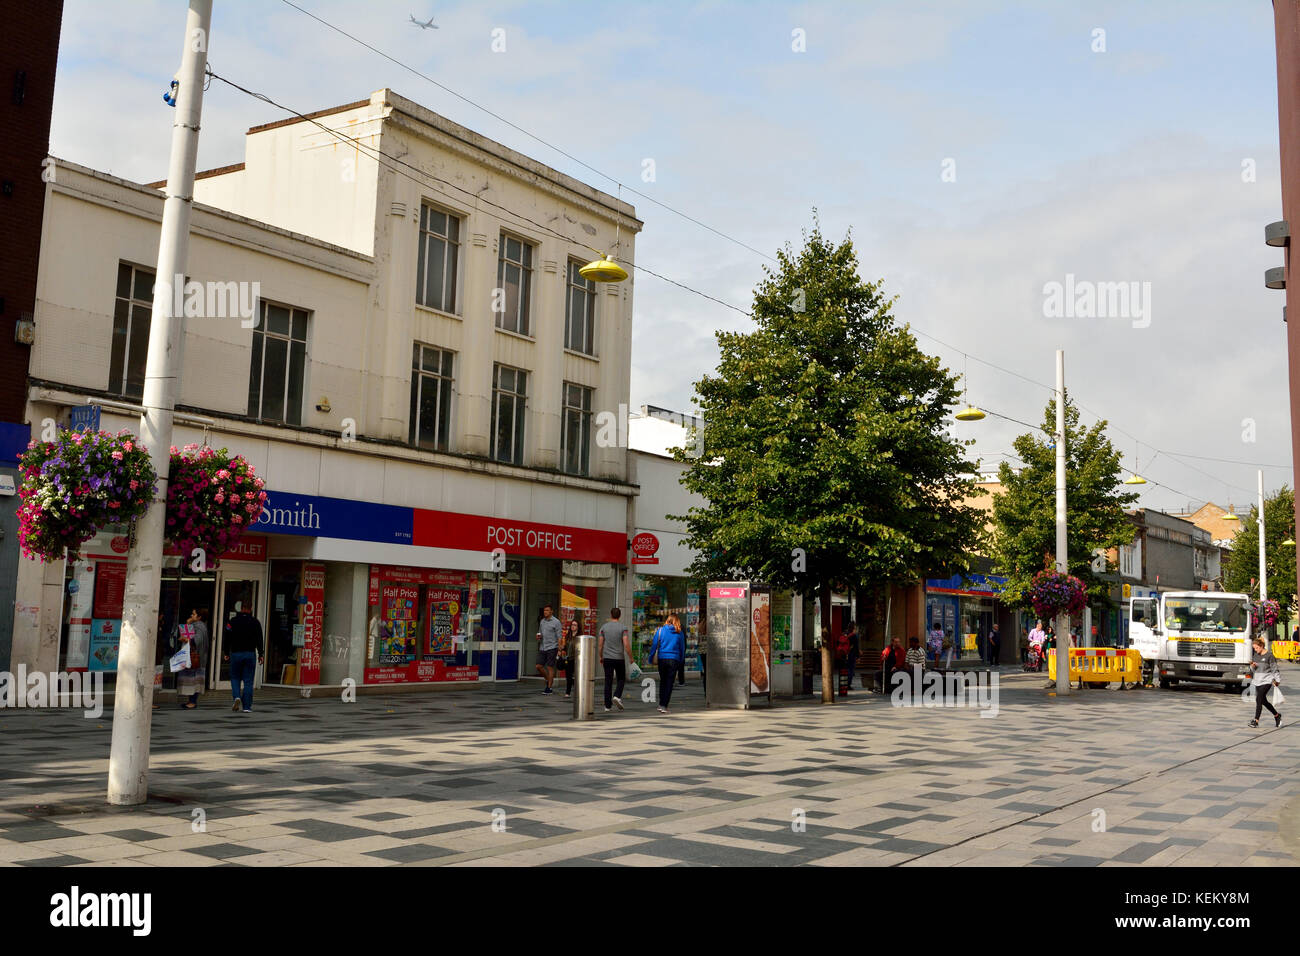 Slough, United Kingdom - September 7, 2017. View of High Street in Slough, with historic buildings, commercial properties. Stock Photo